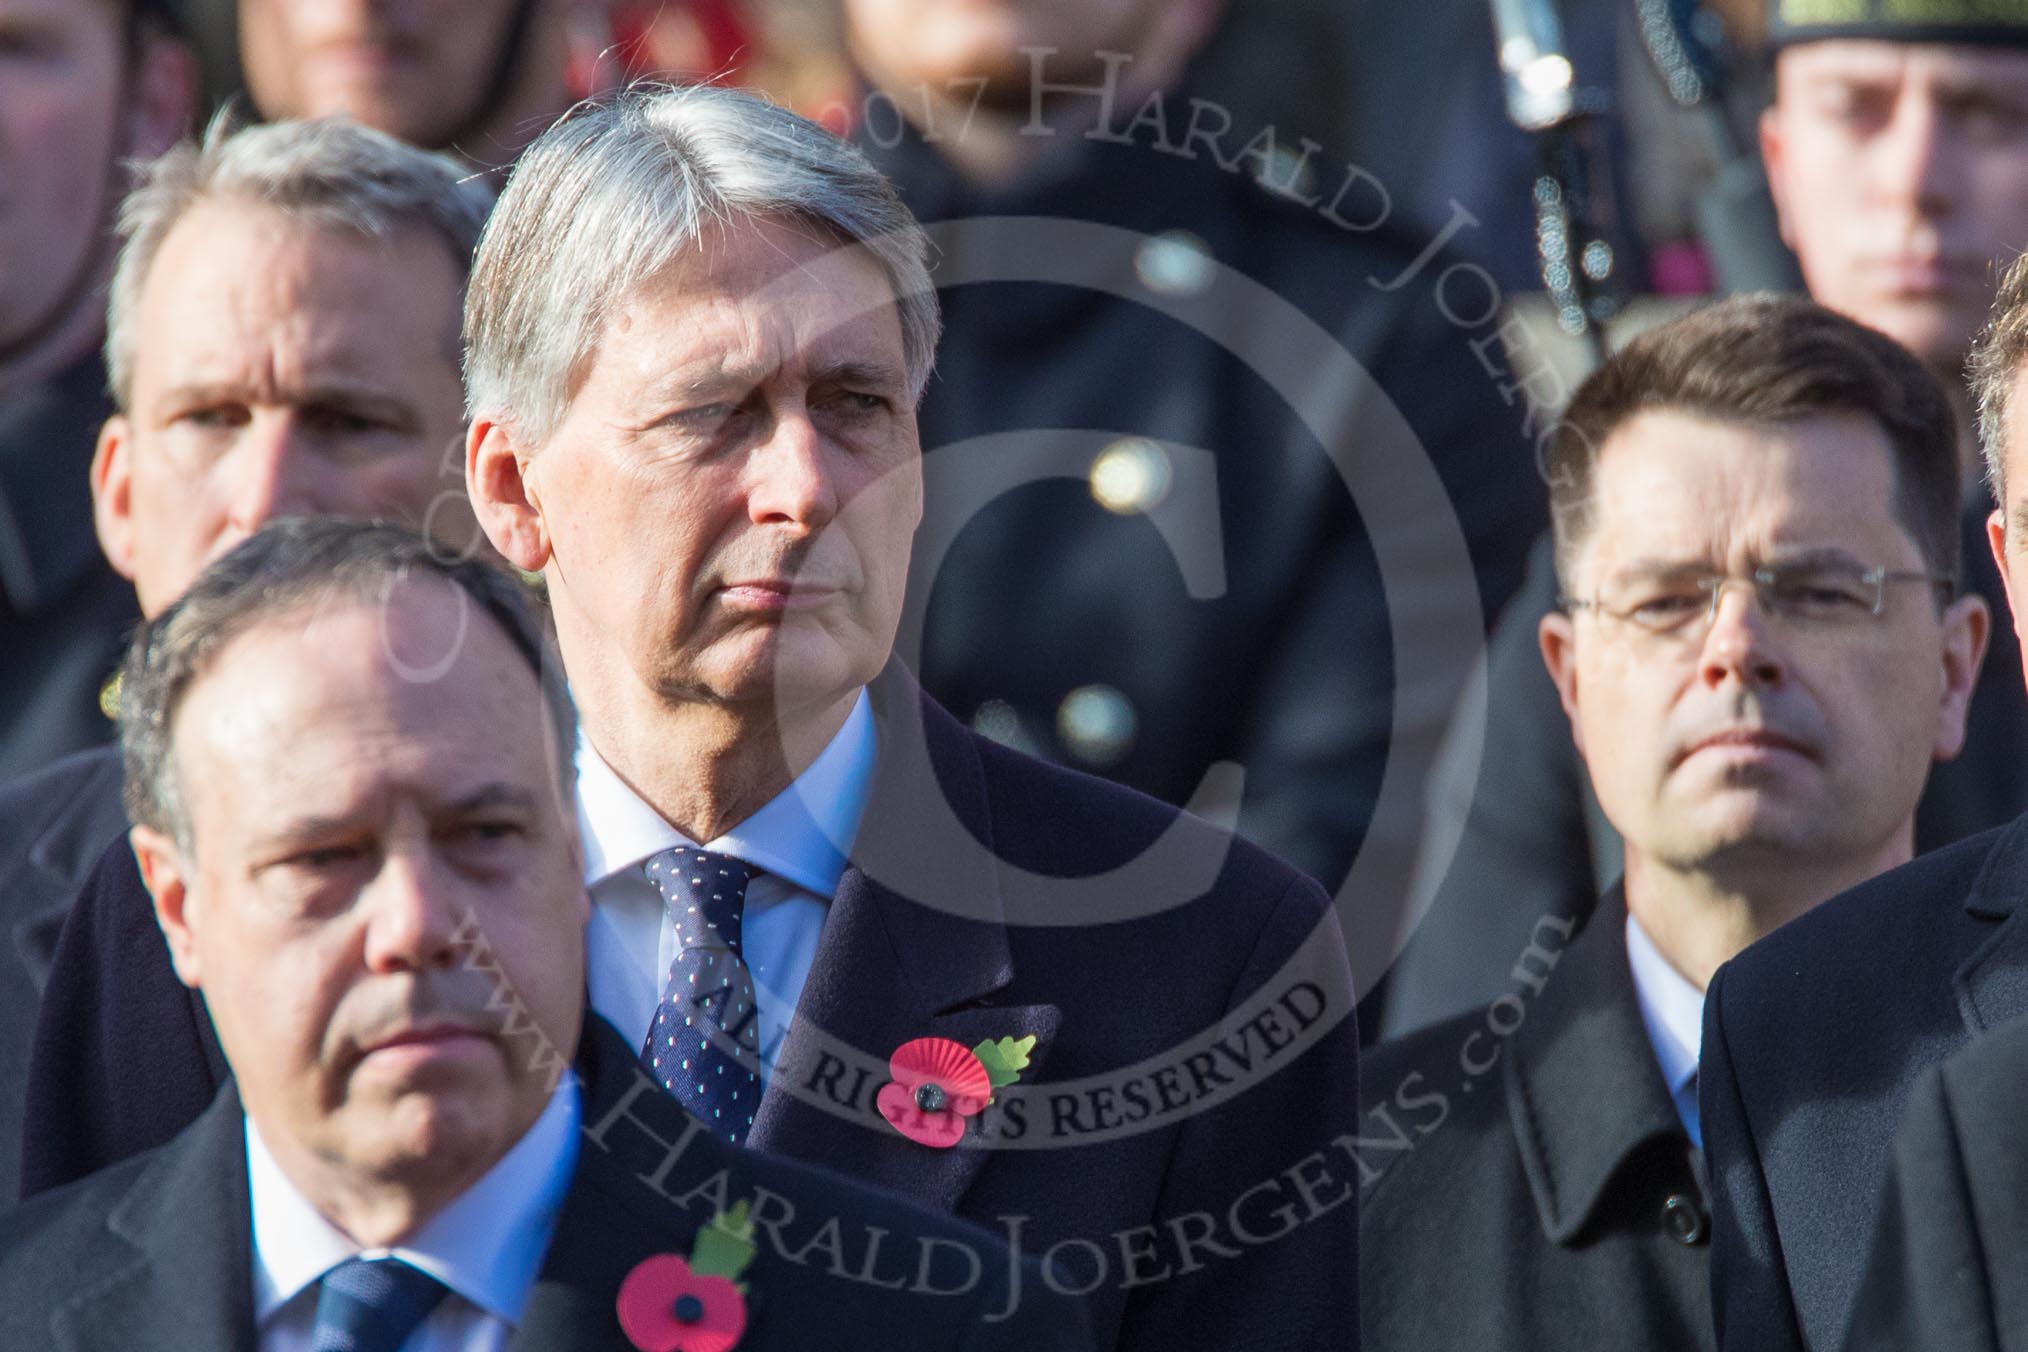 The Rt Hon Philip Hammond MP, (Chancellor of the Exchequer) during the Remembrance Sunday Cenotaph Ceremony 2018 at Horse Guards Parade, Westminster, London, 11 November 2018, 10:57.